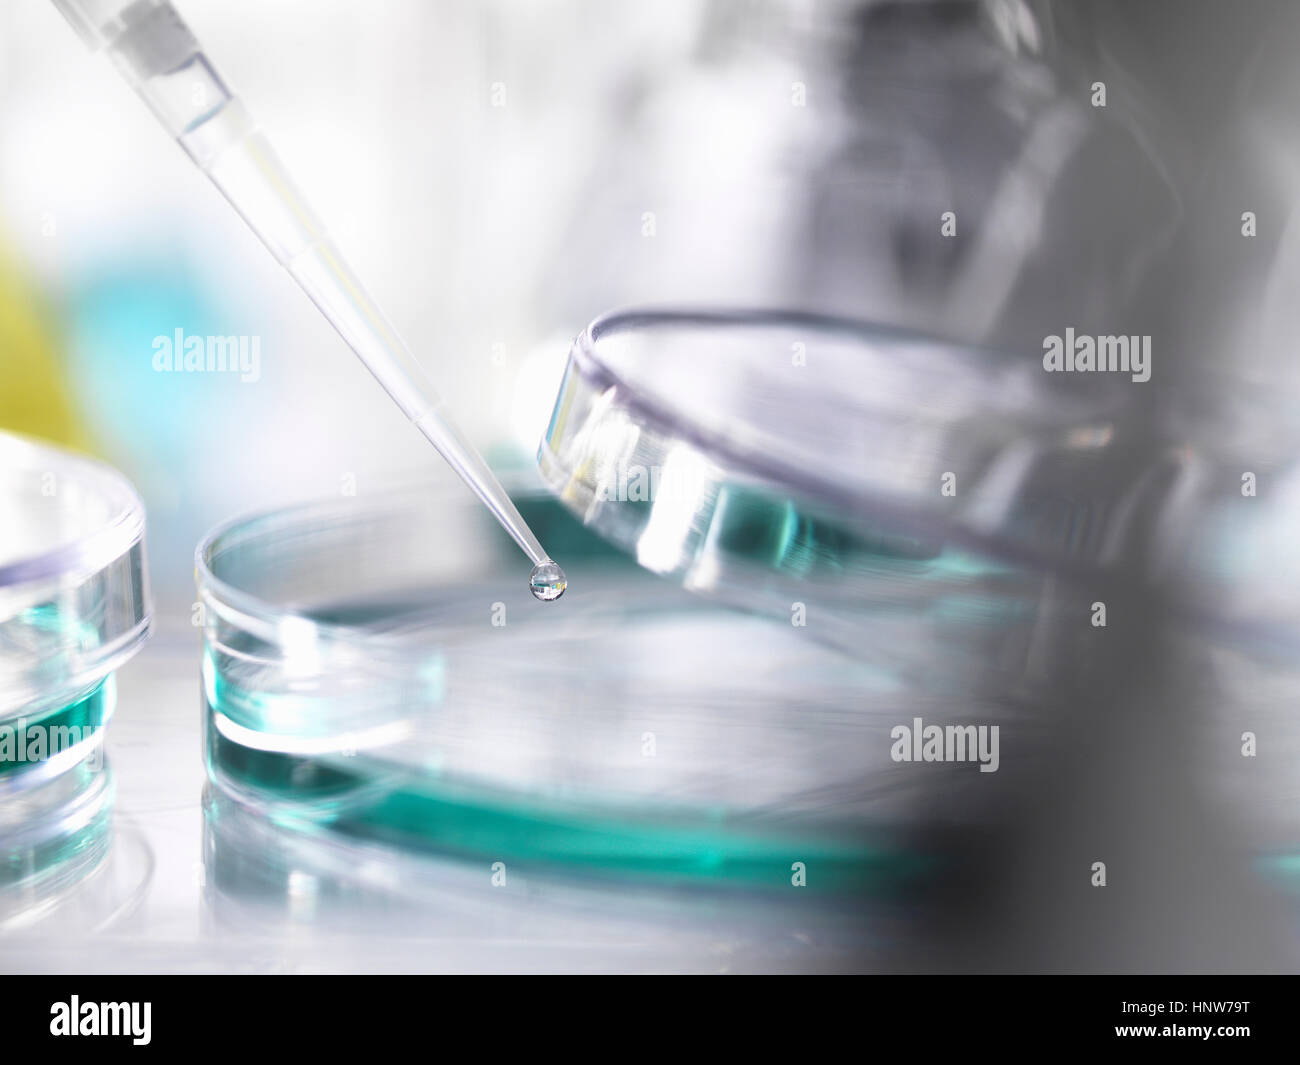 Pipetting a sample into a petri dish during a scientific experiment in a laboratory Stock Photo